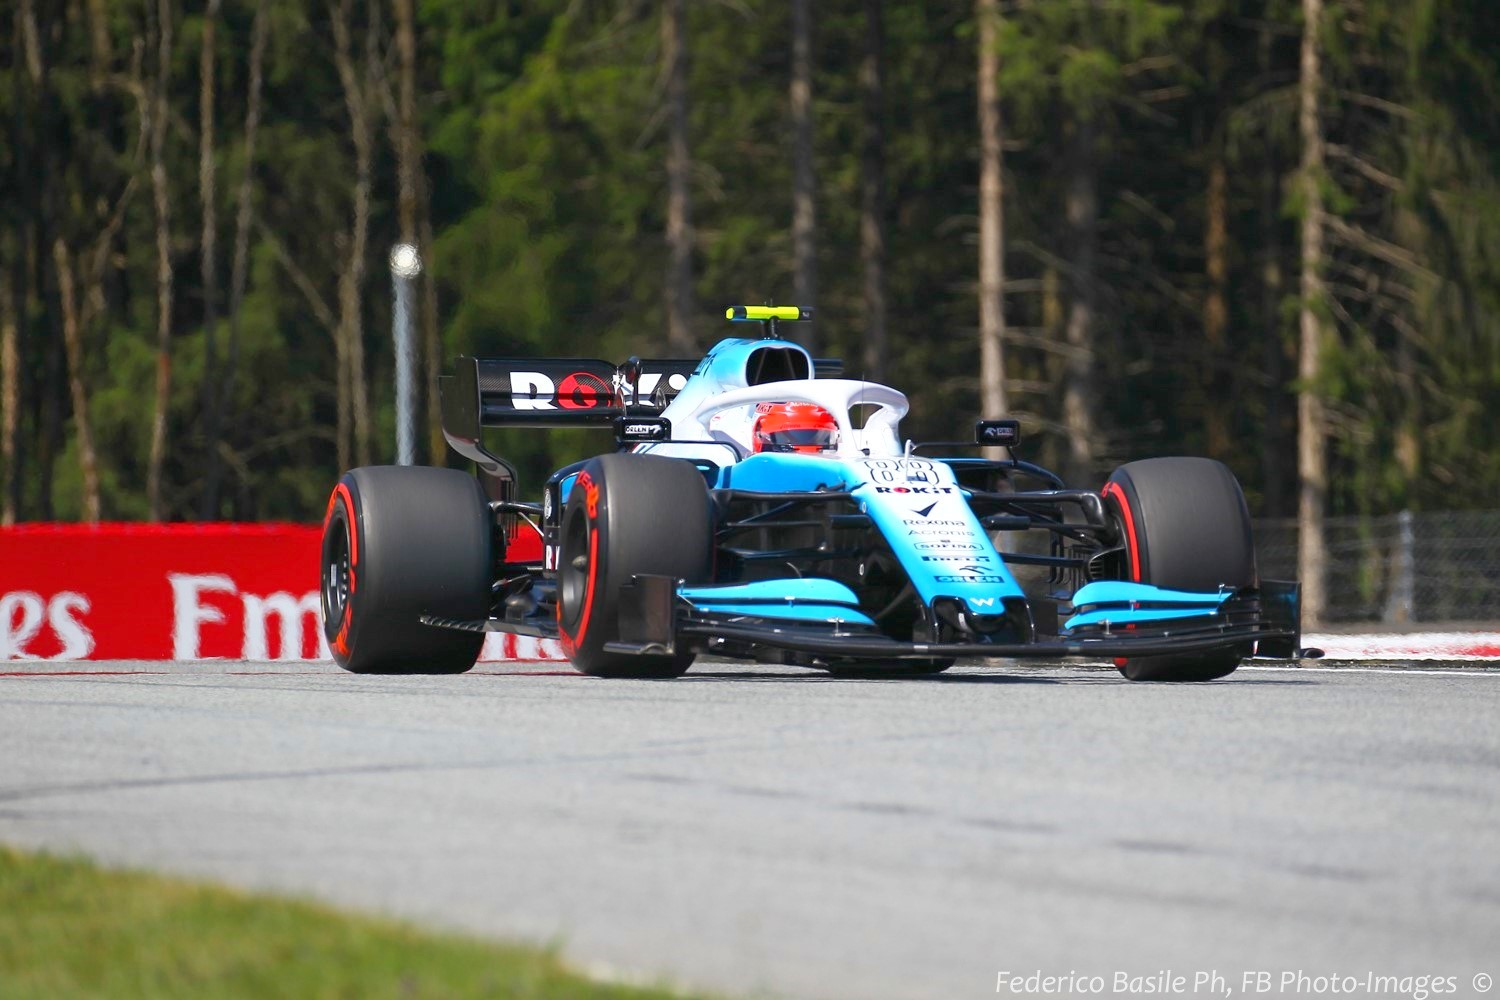 3 laps down in Austria, Kubica was voted F1 Driver of the Day